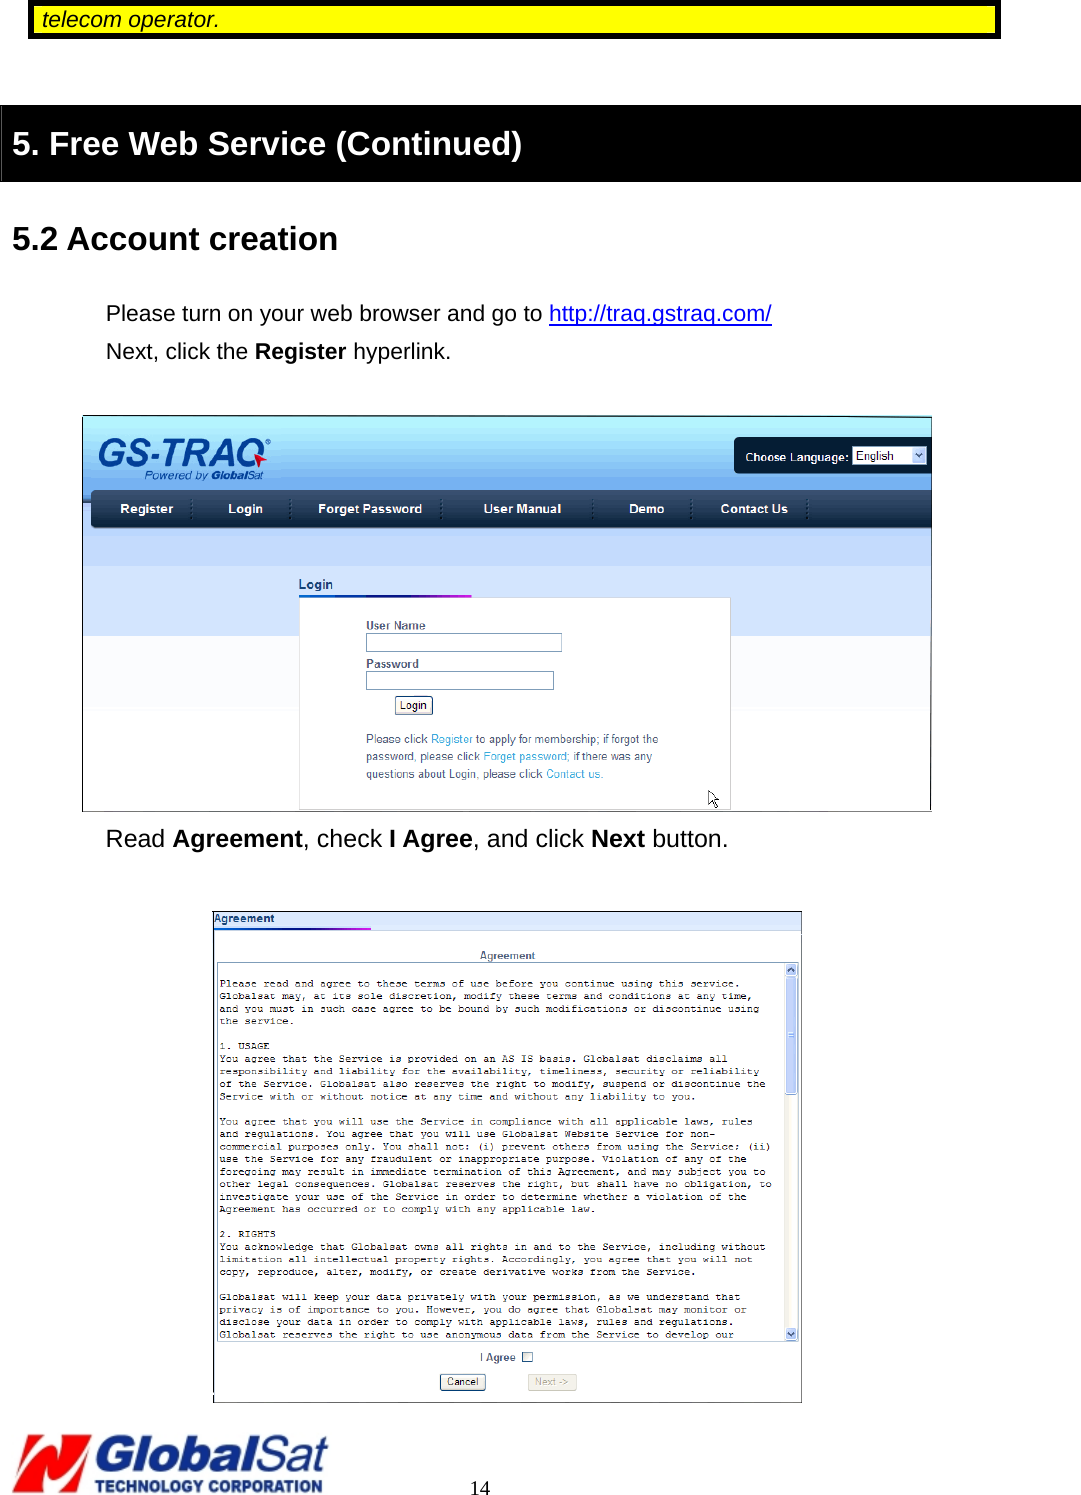                                                                                     14 telecom operator.   5. Free Web Service (Continued) 5.2 Account creation Please turn on your web browser and go to http://traq.gstraq.com/ Next, click the Register hyperlink.    Read Agreement, check I Agree, and click Next button.   